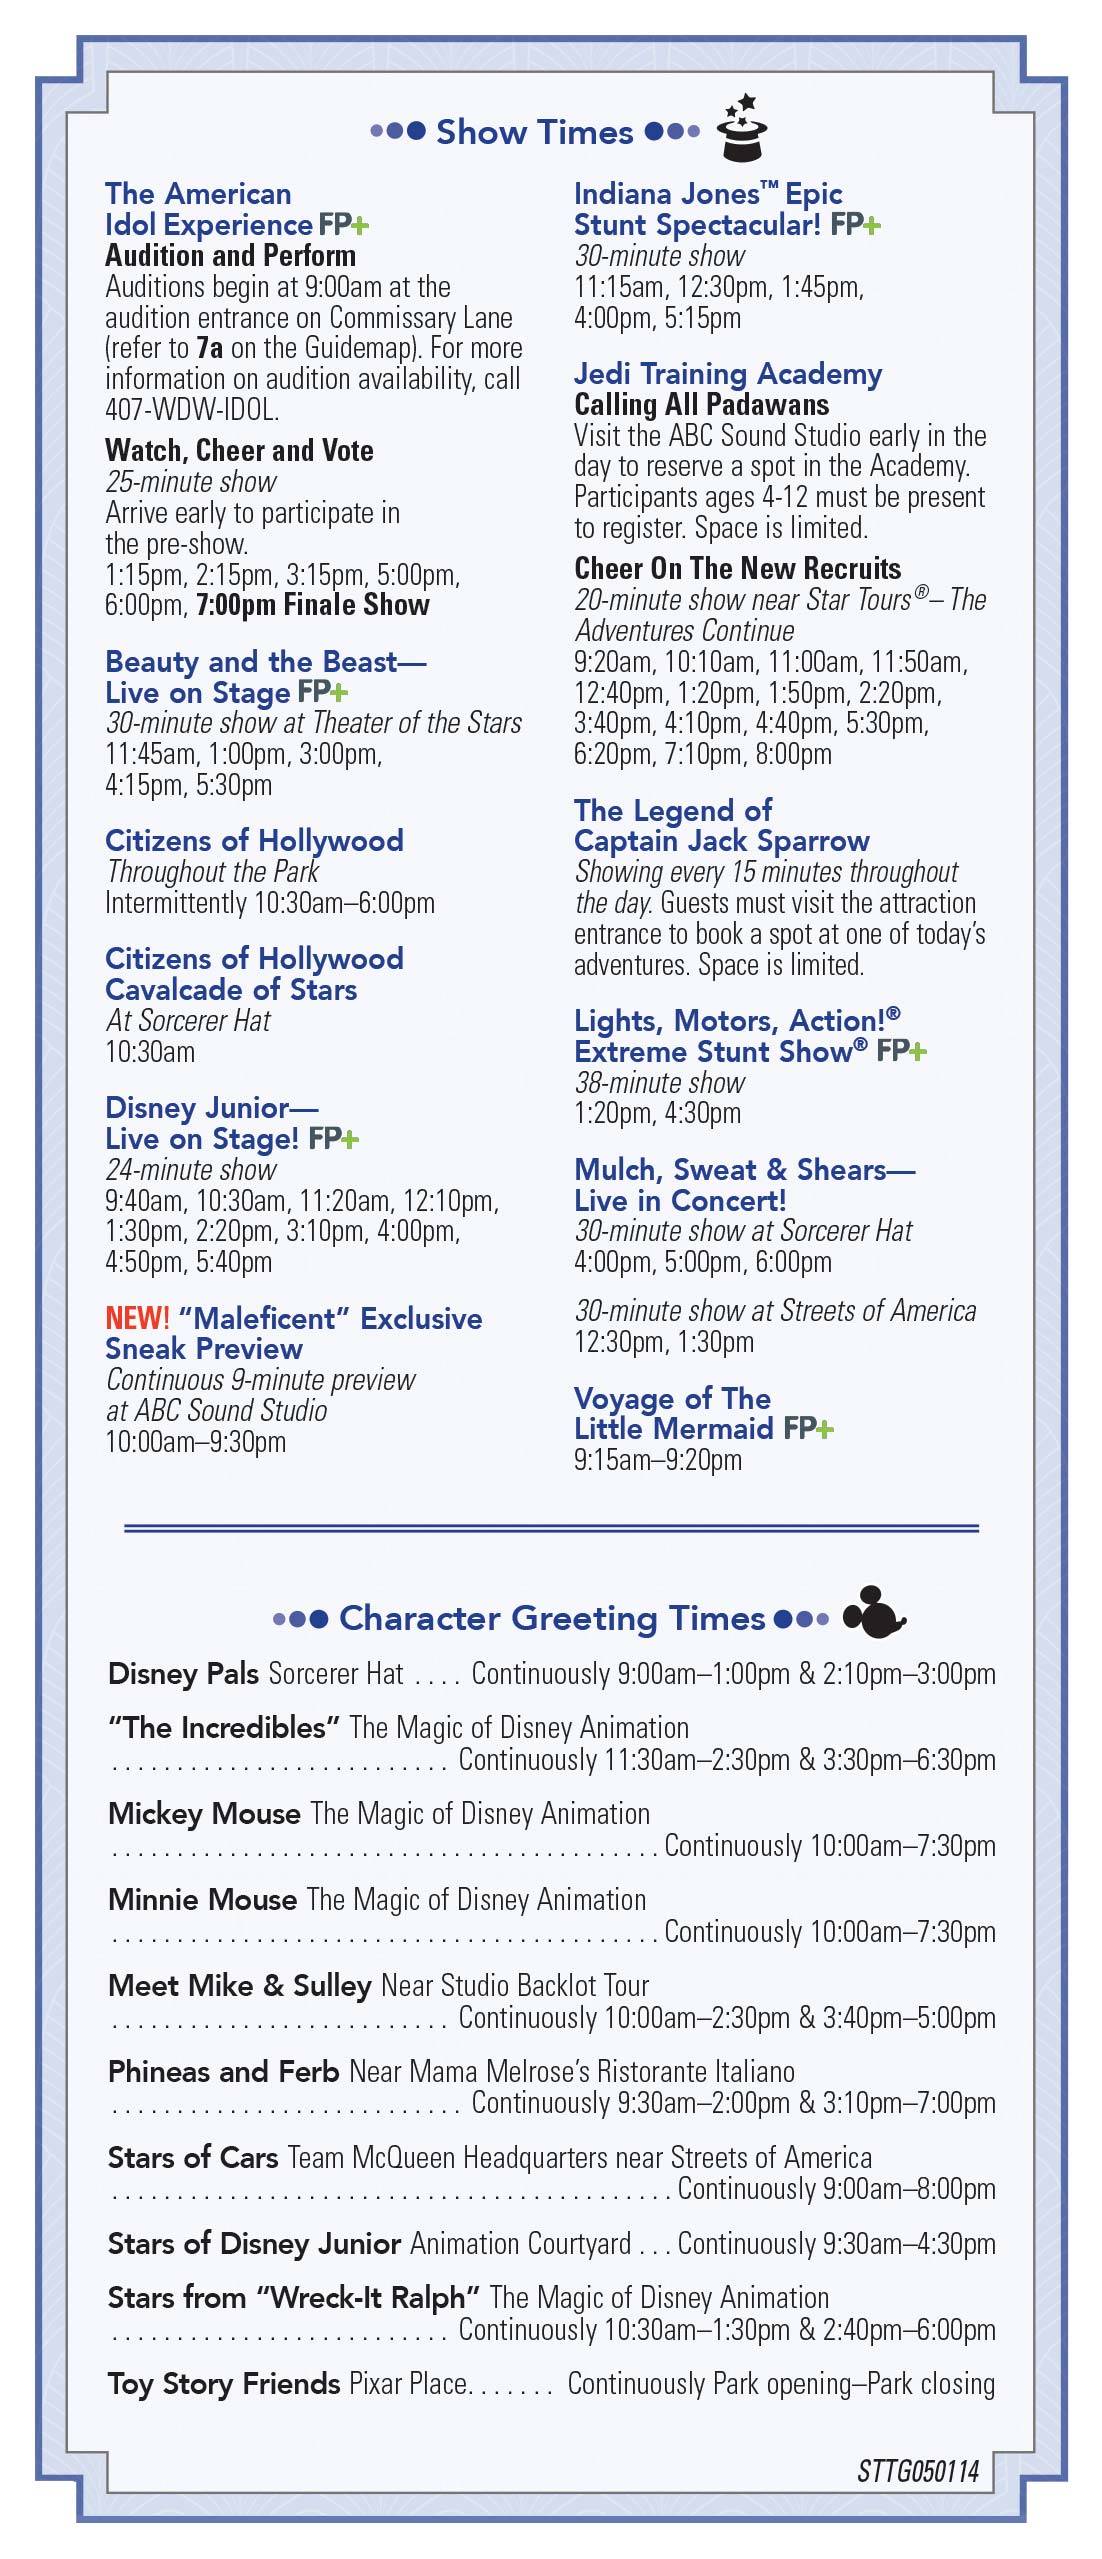 Disney's Hollywood Studios 25th Anniversary times guide back